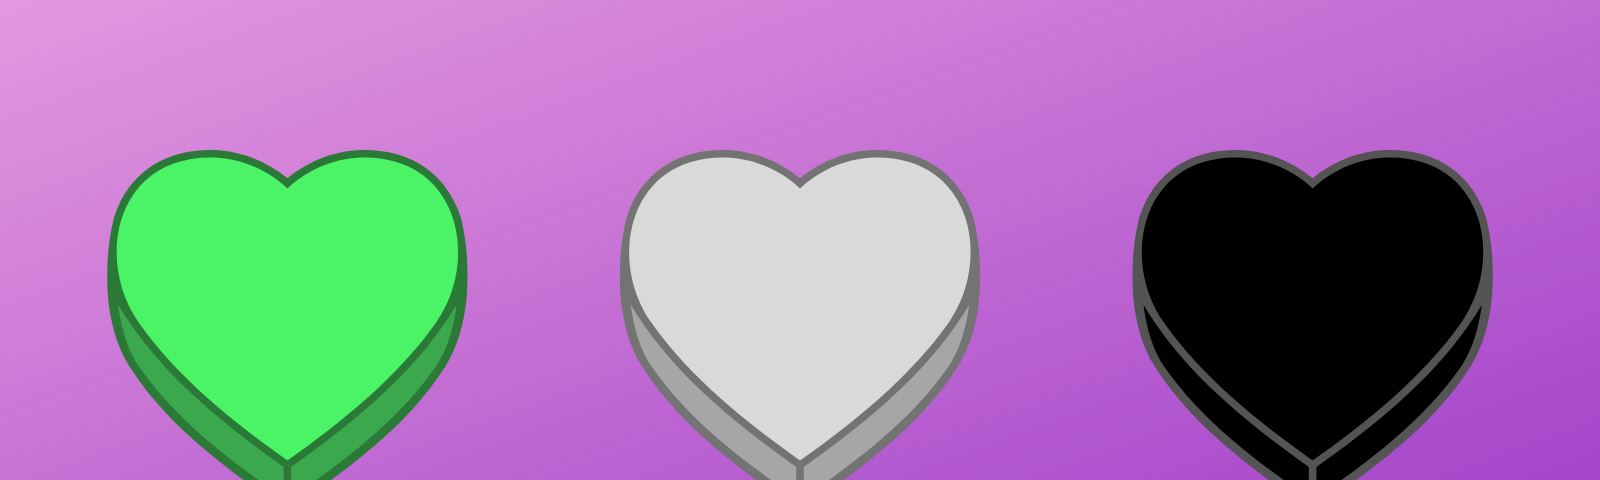 Purple gradient with simple illustration of three hearts that are green, gray, and black from left to right to represent the aromantic flag